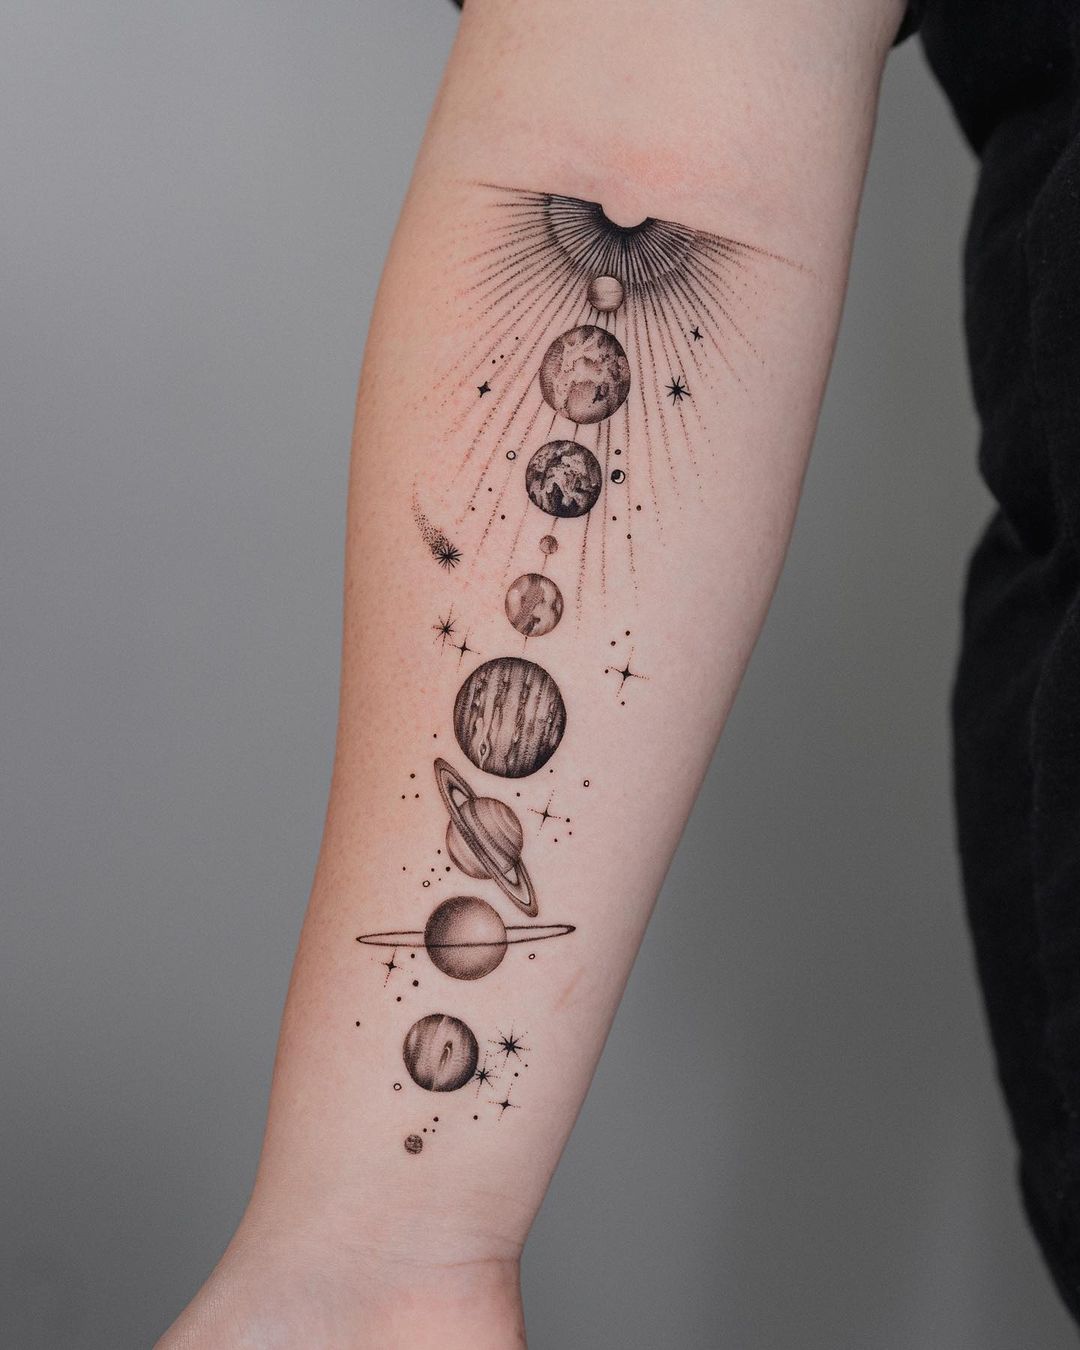 space forearm tattoo design by cass.fuller